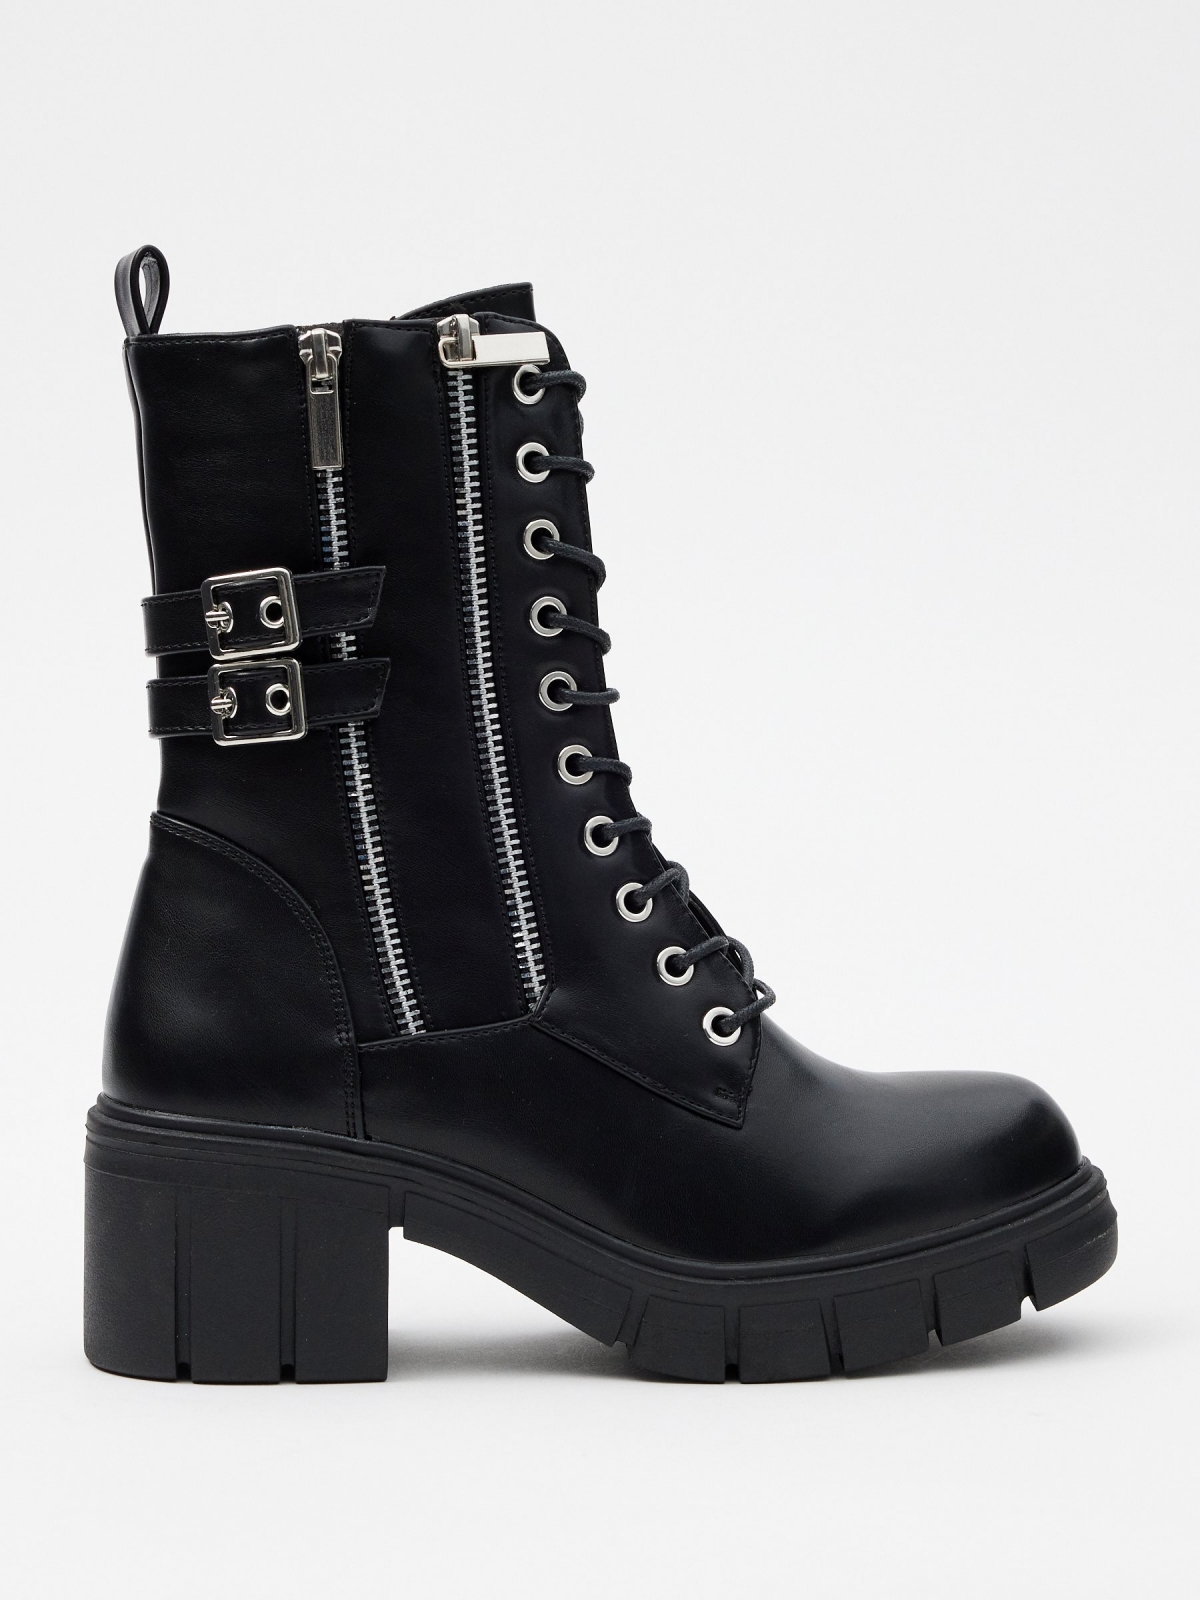 Ankle boots with studs and buckles black